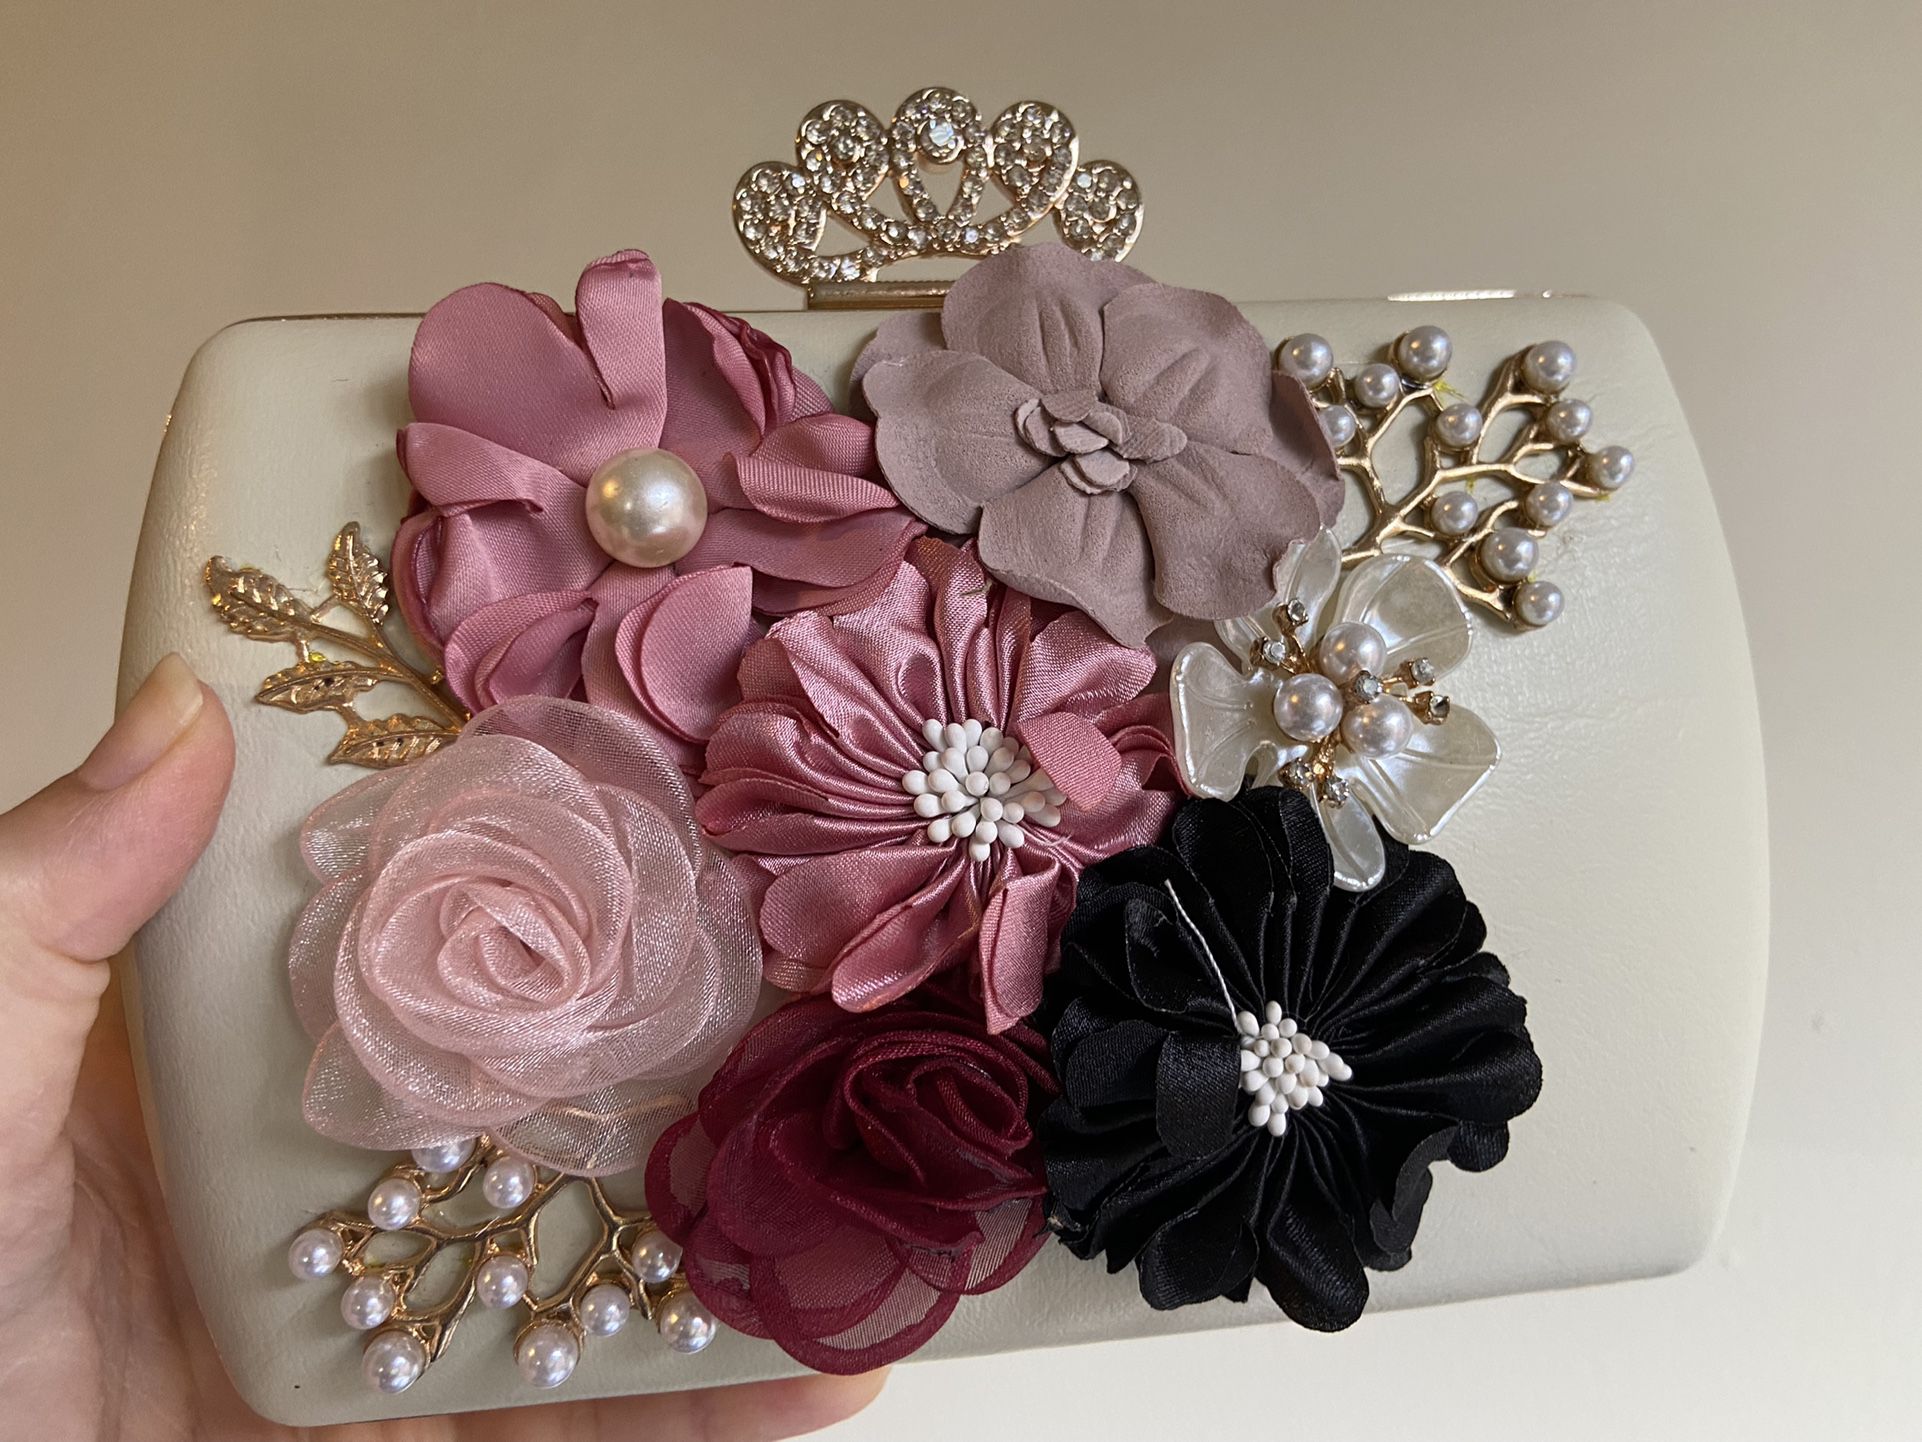 Beautiful Flowers Female Ceremony Bag White Woman Party Evening Purses Wedding Bride Clutch purse beige Message me if you are interested in a bundle o